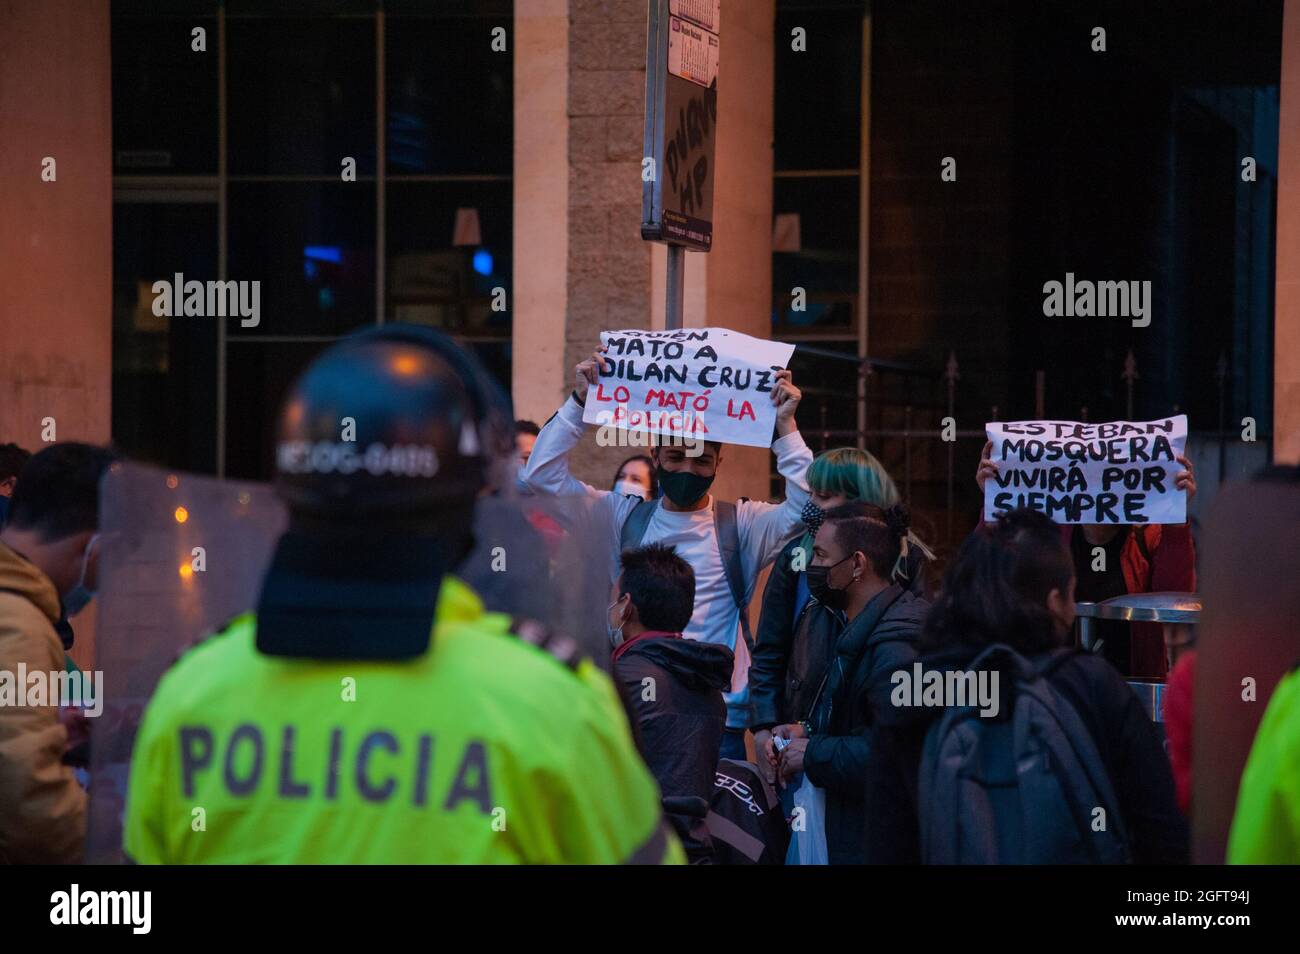 Demonstrators hold a sign that reads 'Who Killed Dilan Cruz? Police did' during a rally organized by students of the Universidad Distrital, after a few days back Esteban Mosquera, a social leader and community member was killed two years after loosing his eye on a police brutality case, in Bogota, Colombia on August 26, 2021. Stock Photo